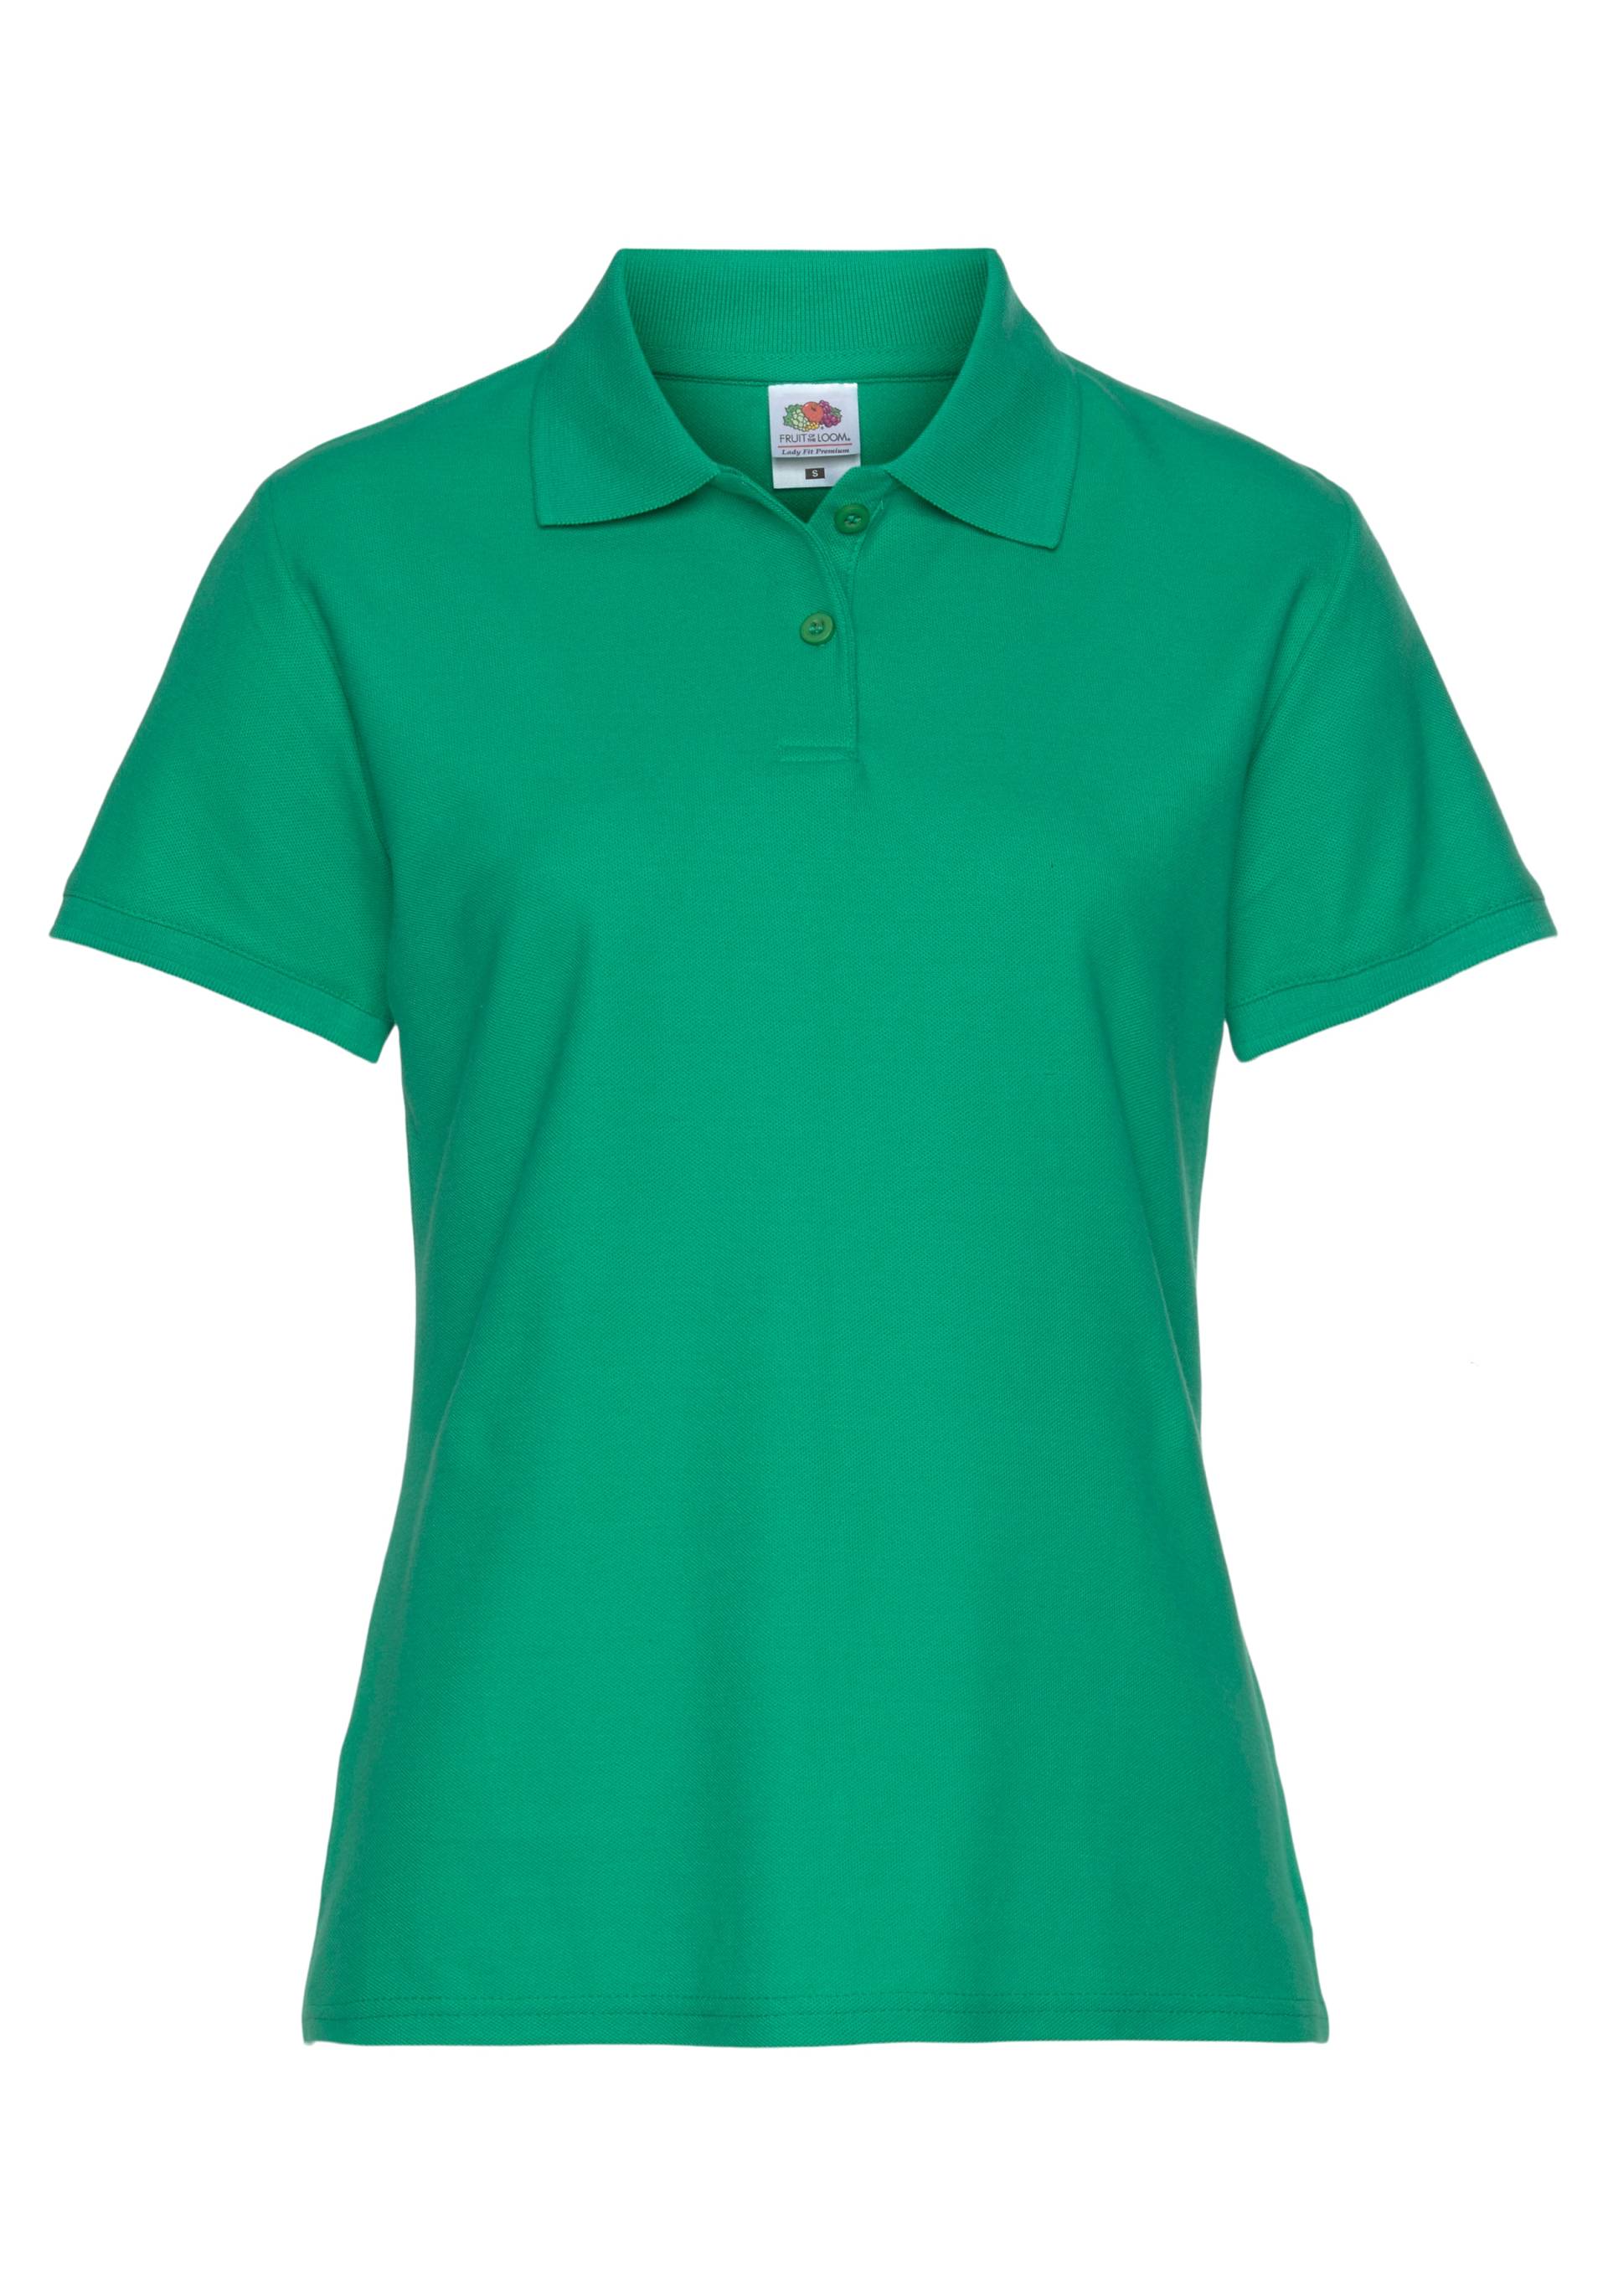 Fruit of the Loom Poloshirt »Lady-Fit Premium Polo« von Fruit of the Loom